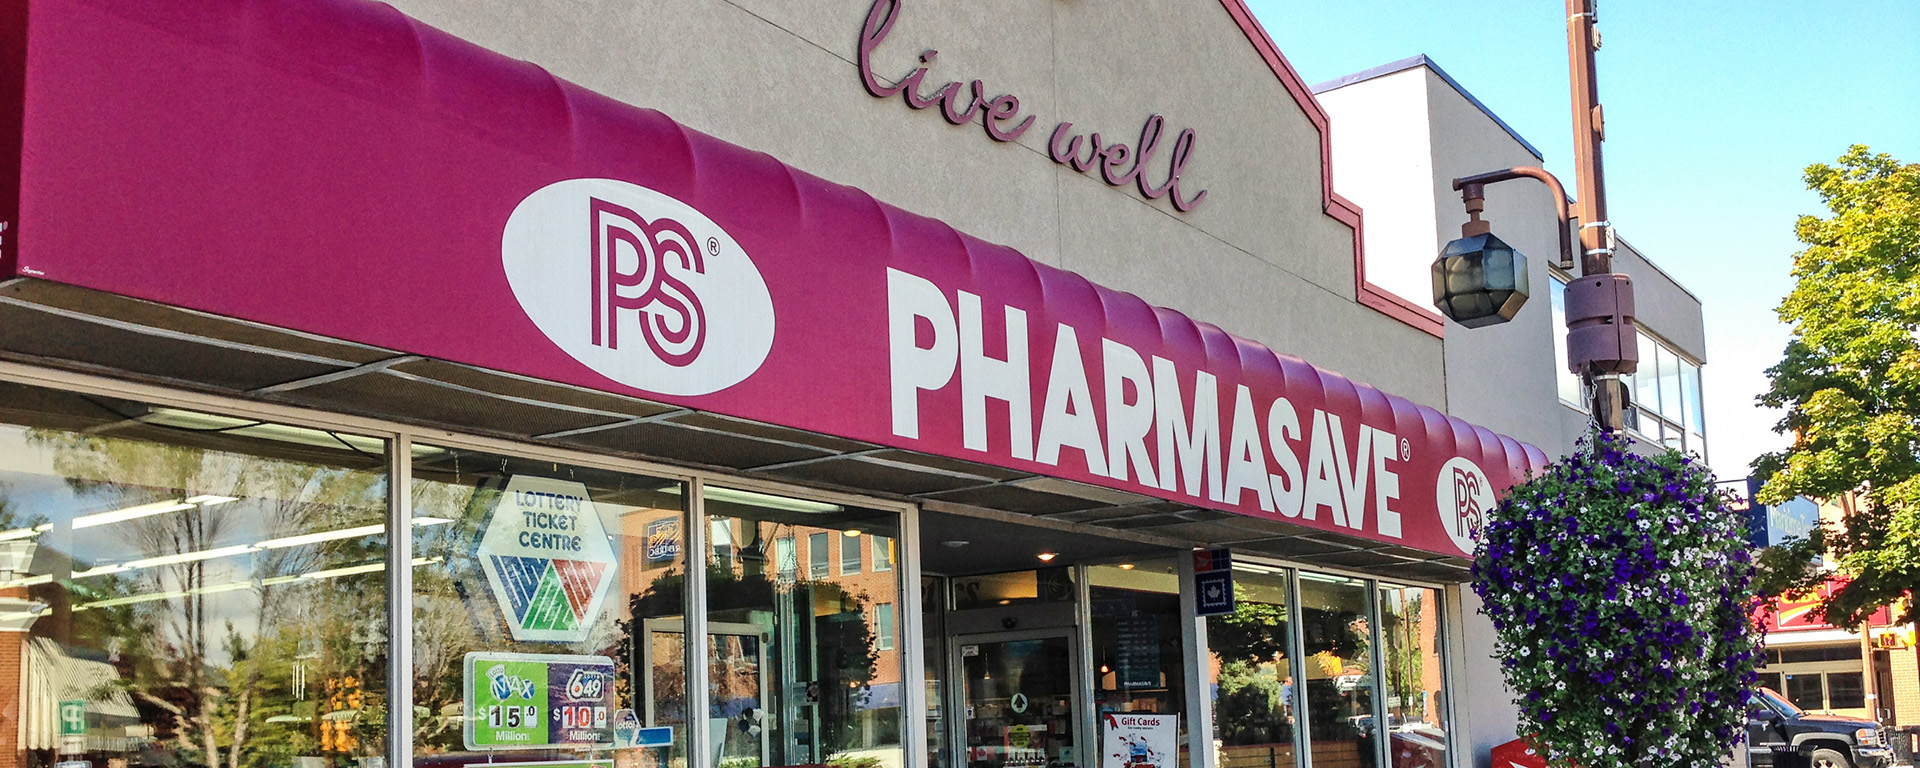 Exterior of the Pharmasave Baker Street location with Pharmasave logo 